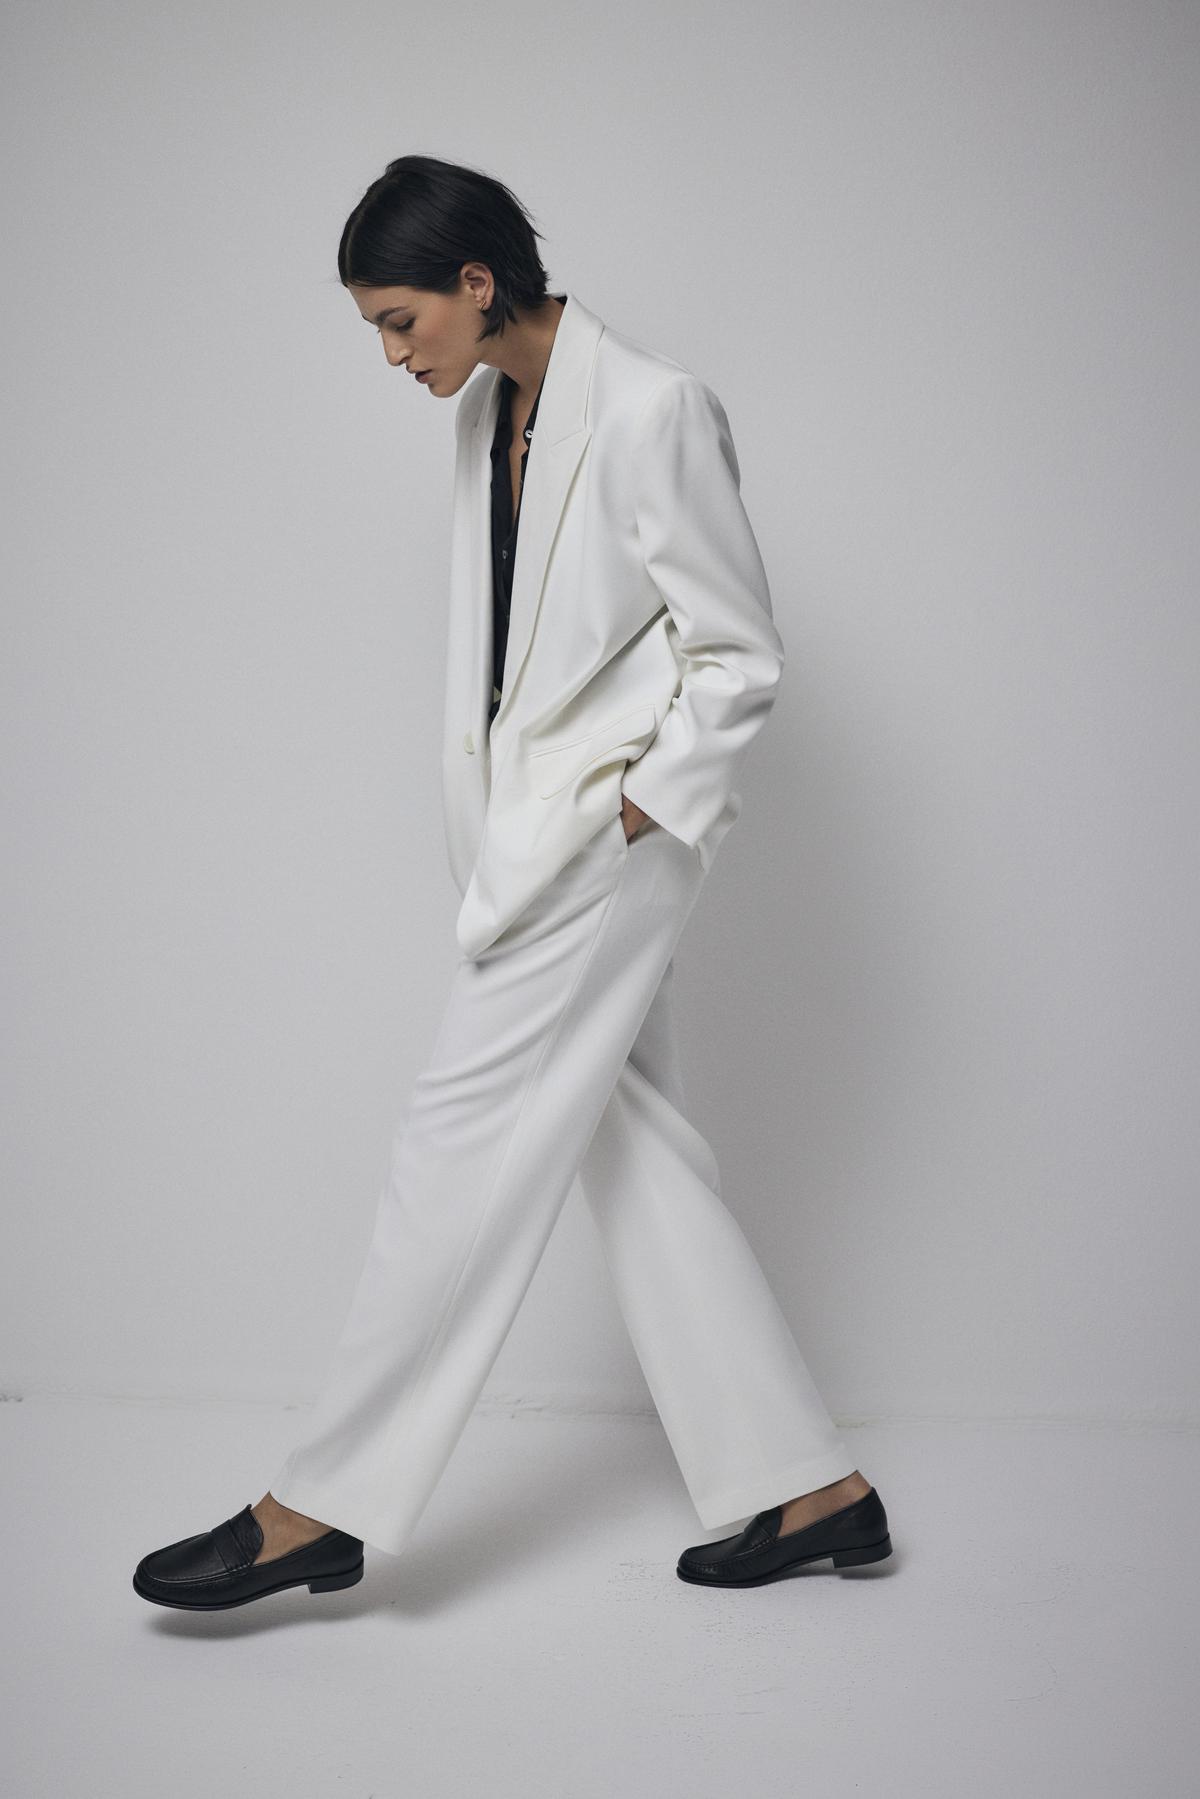   A woman wearing a white structured Fairfax blazer by Velvet by Jenny Graham with black shoes. 